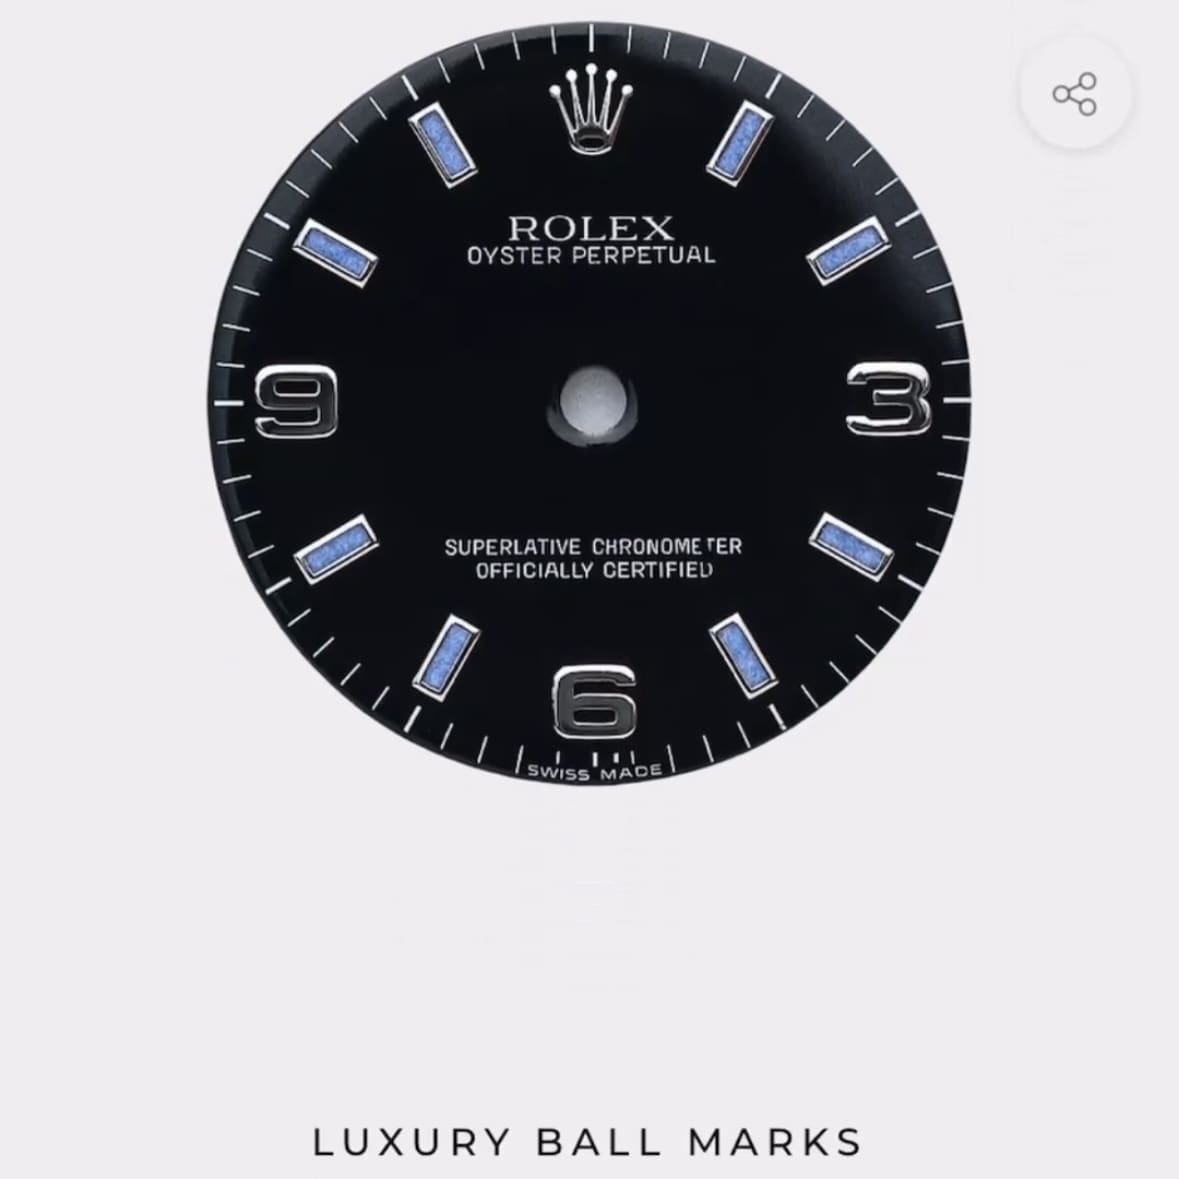 Is using a Rolex dial as a ball marker the ultimate golf club flex?